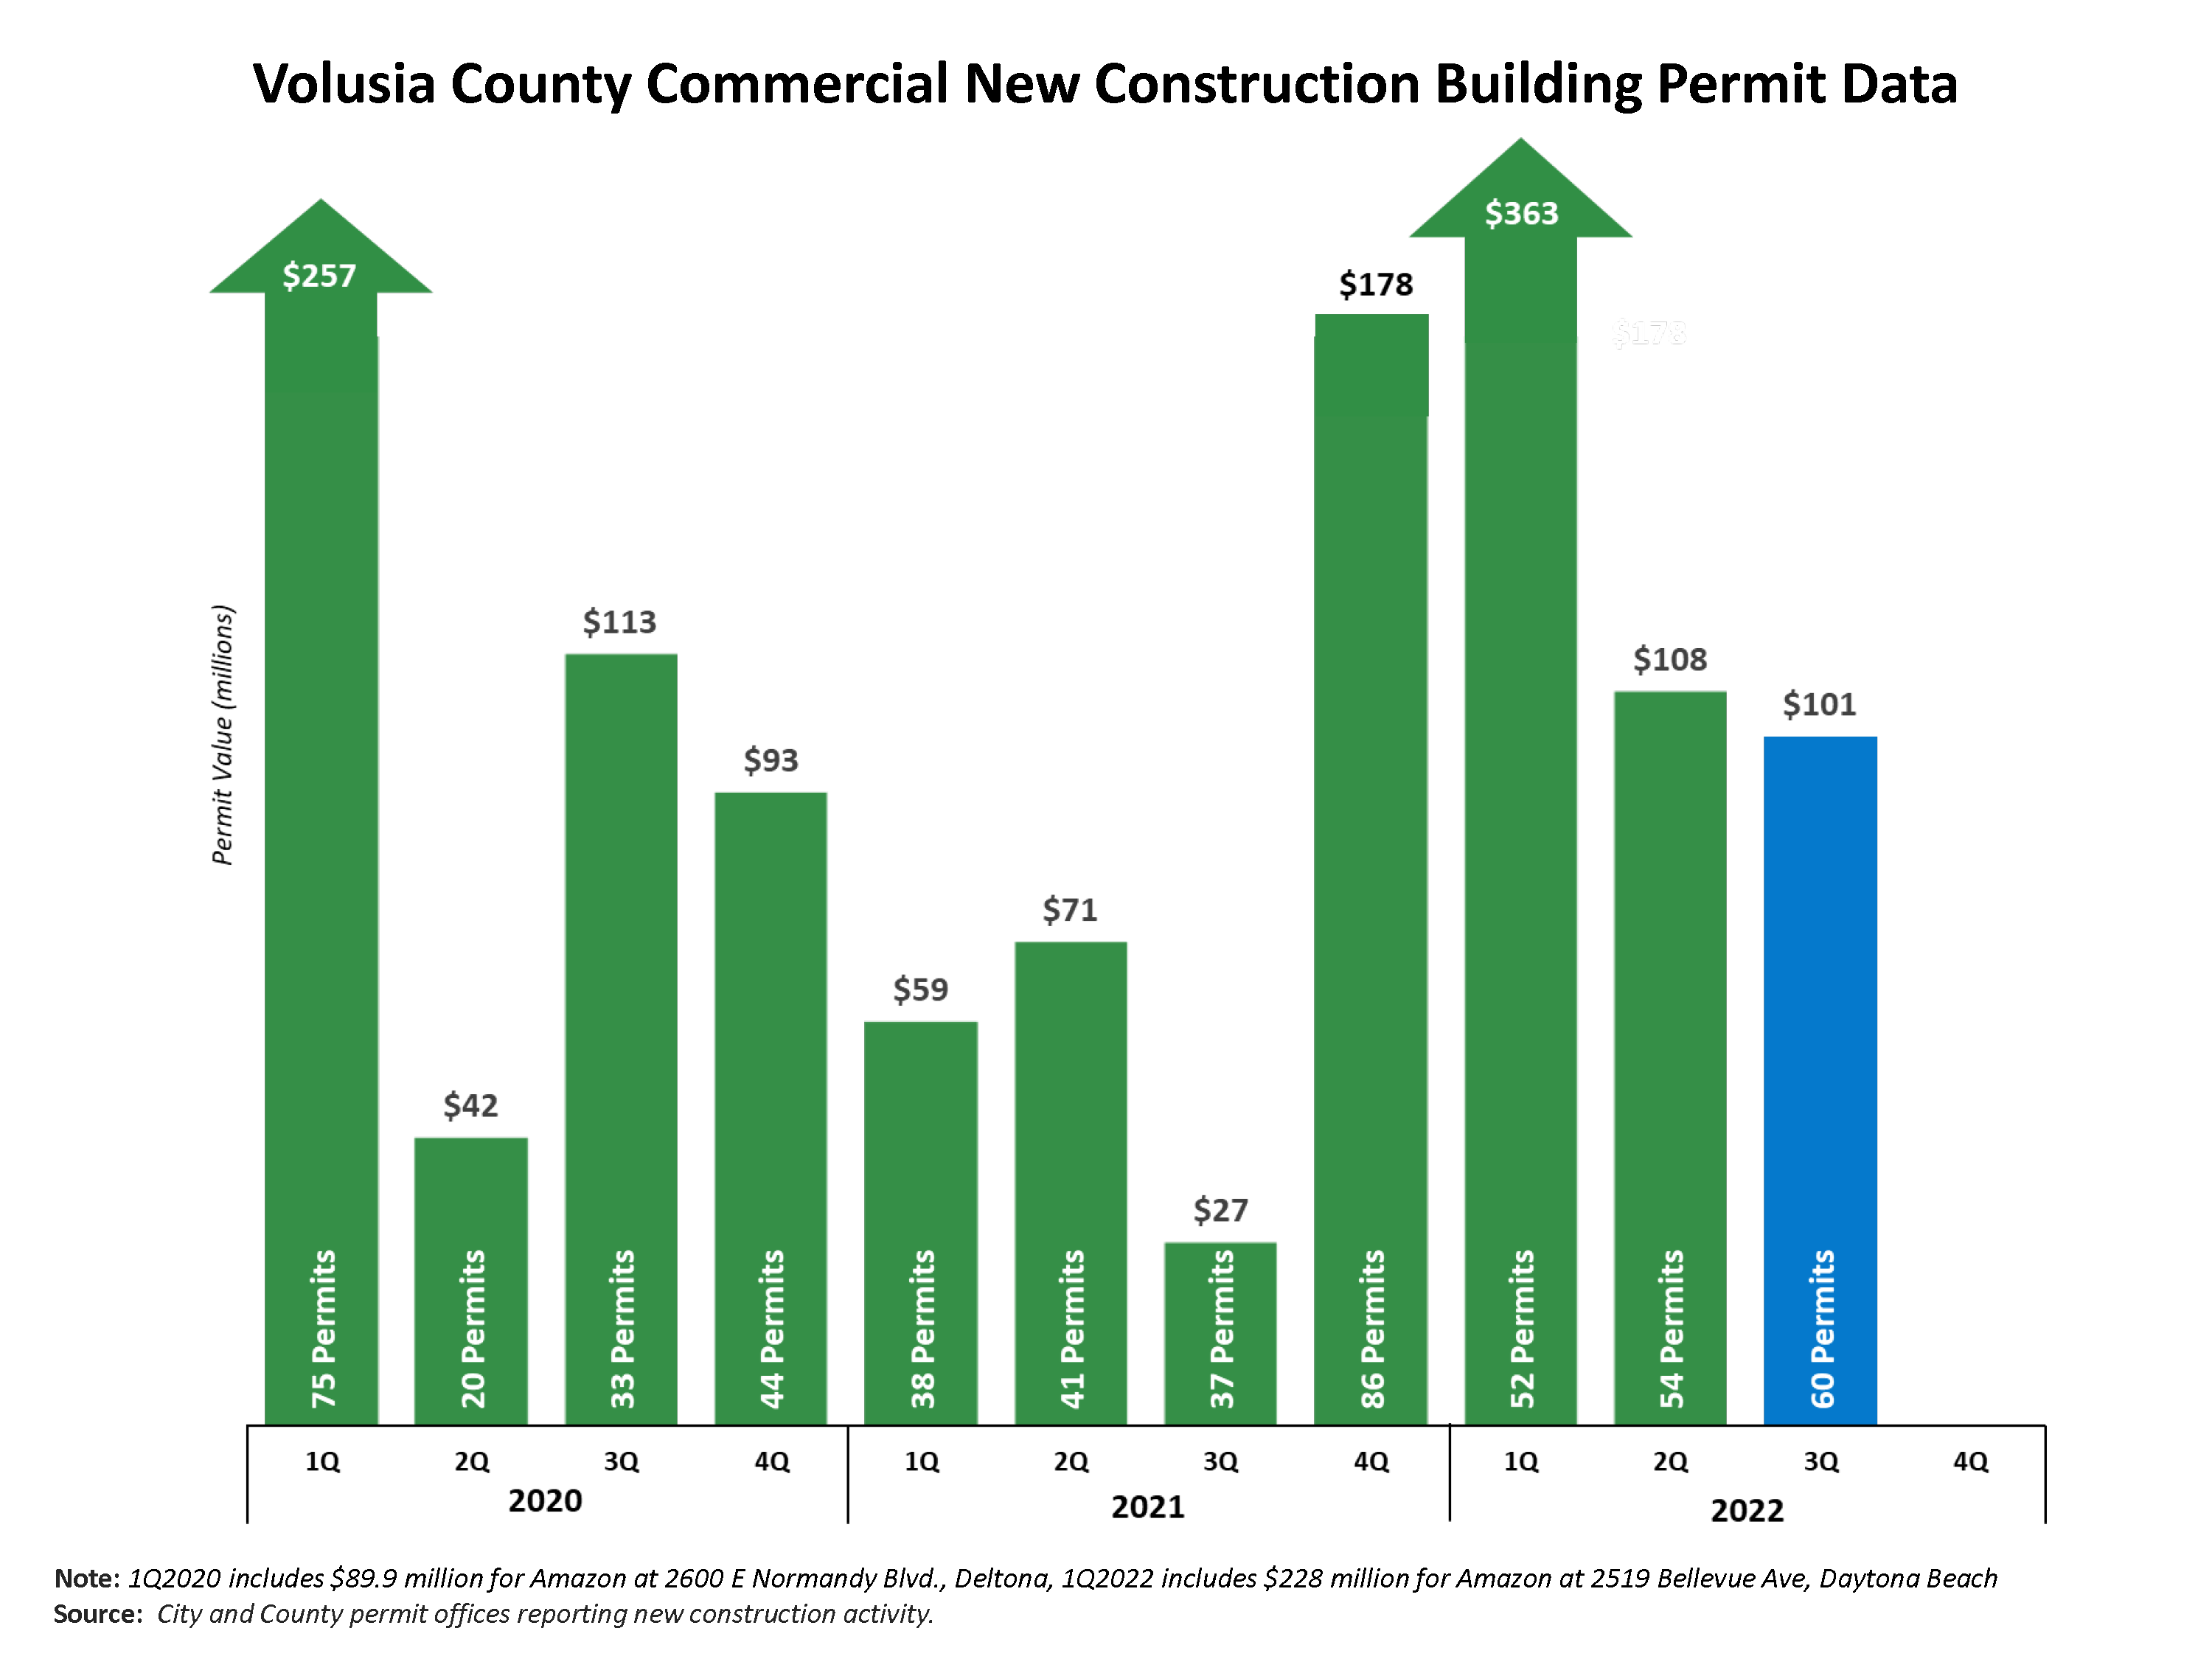 Chart showing the 11 most recent quarters of commercial new construction building permit activity ending Sept. 2022